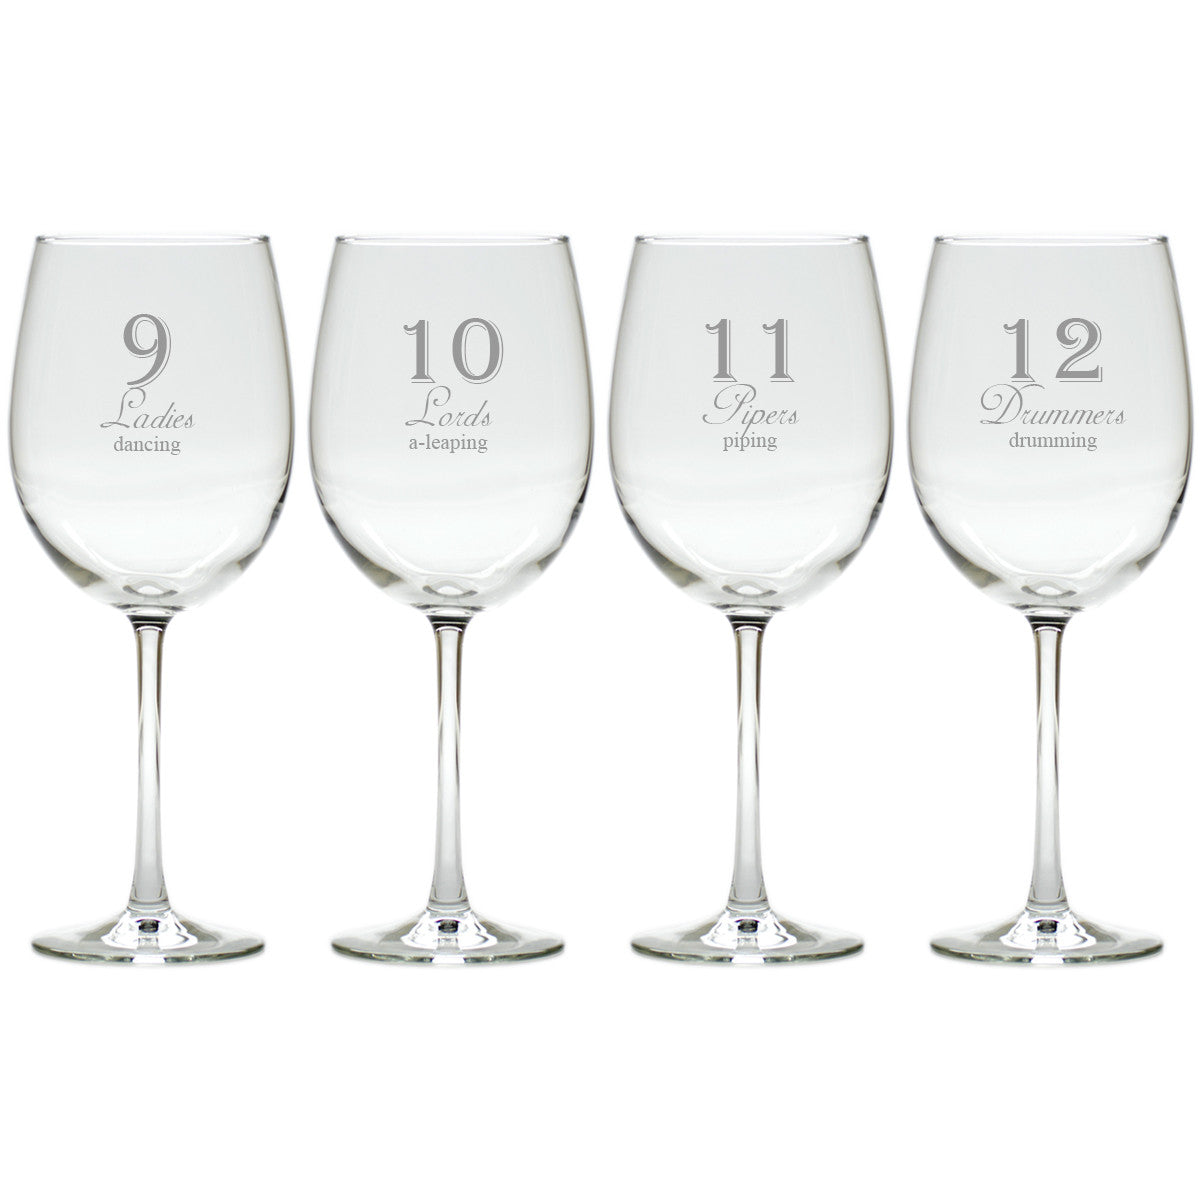 Single (1) Replacement Glass For 12 Days of Christmas Wine Glasses ONLY 1  GLASS